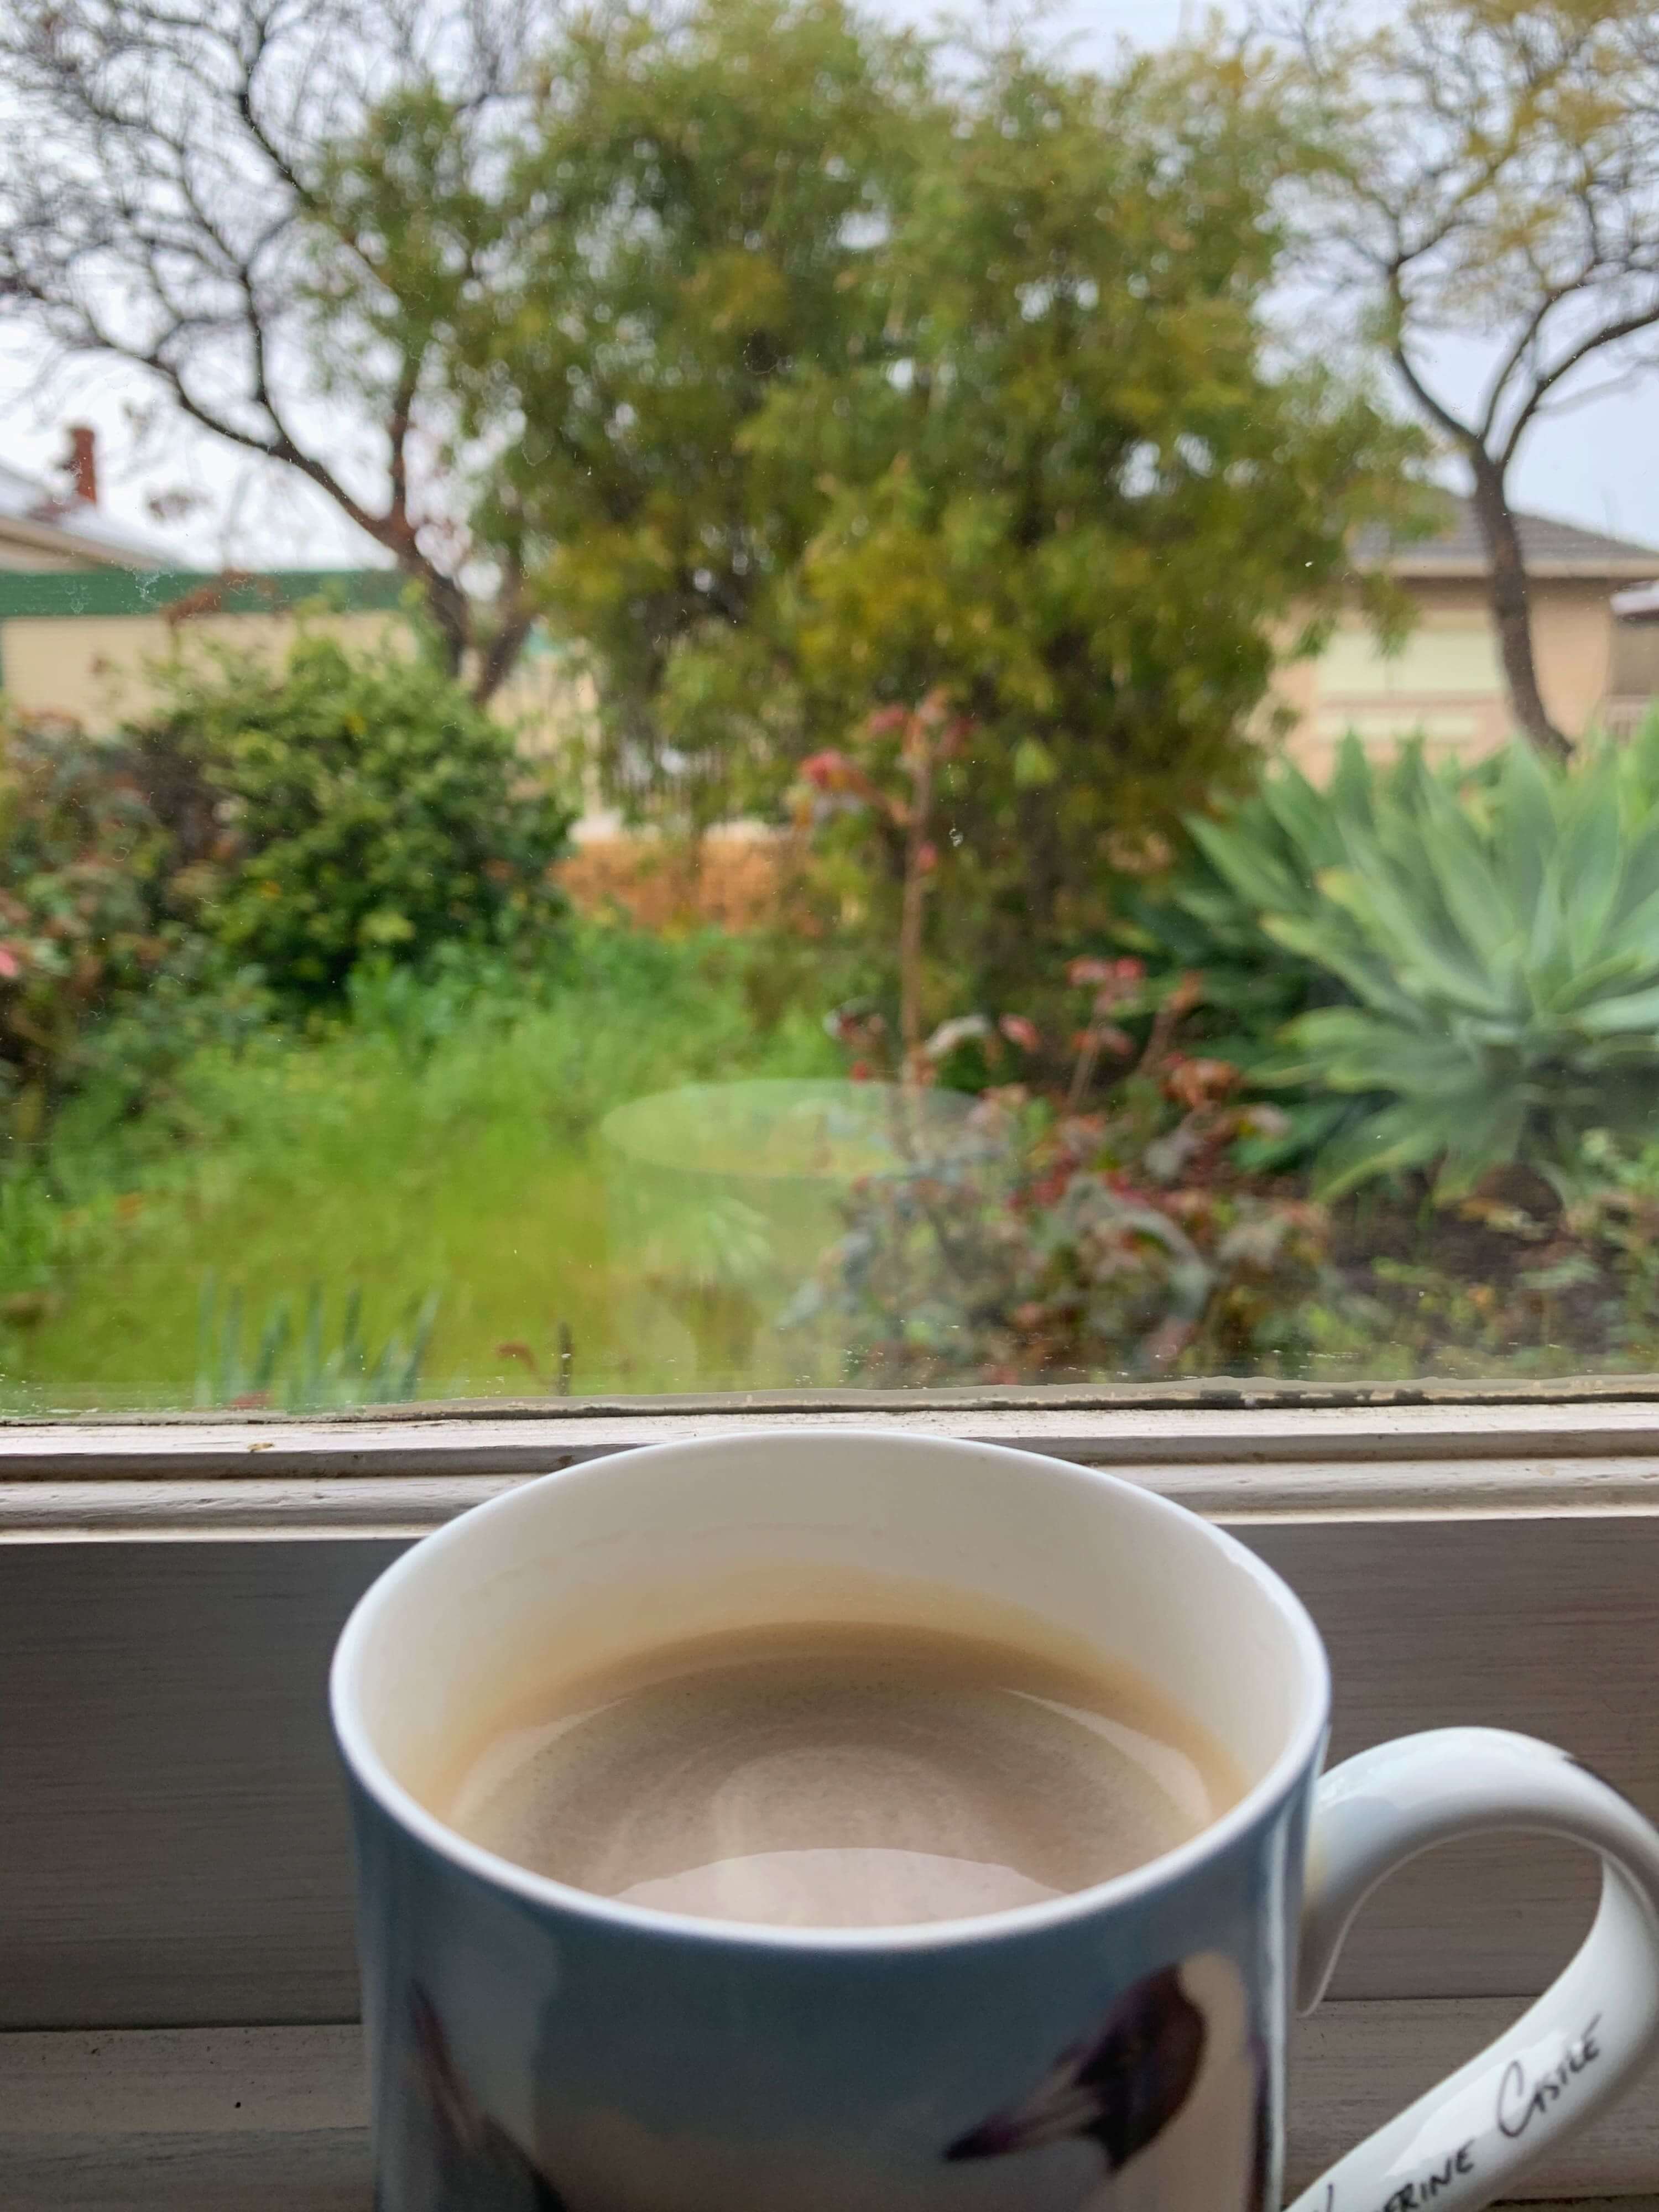 photo of a mug full of coffee in front of a glass window with a green garden view beyond